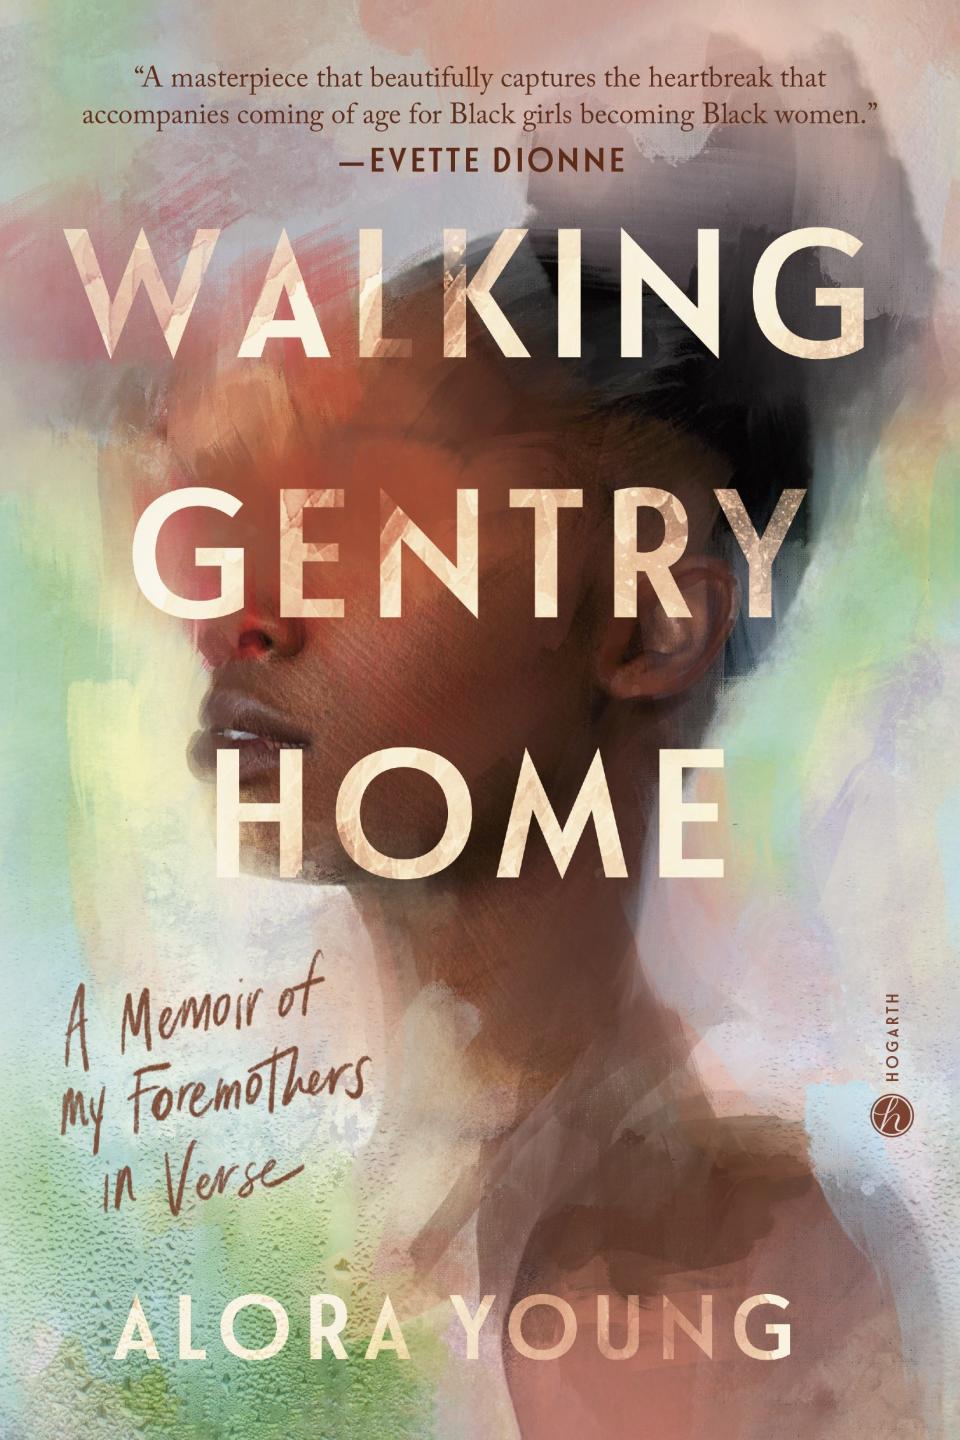 “Walking Gentry Home: A Memoir of My Foremothers in Verse” by Alora Young. Published 2022.